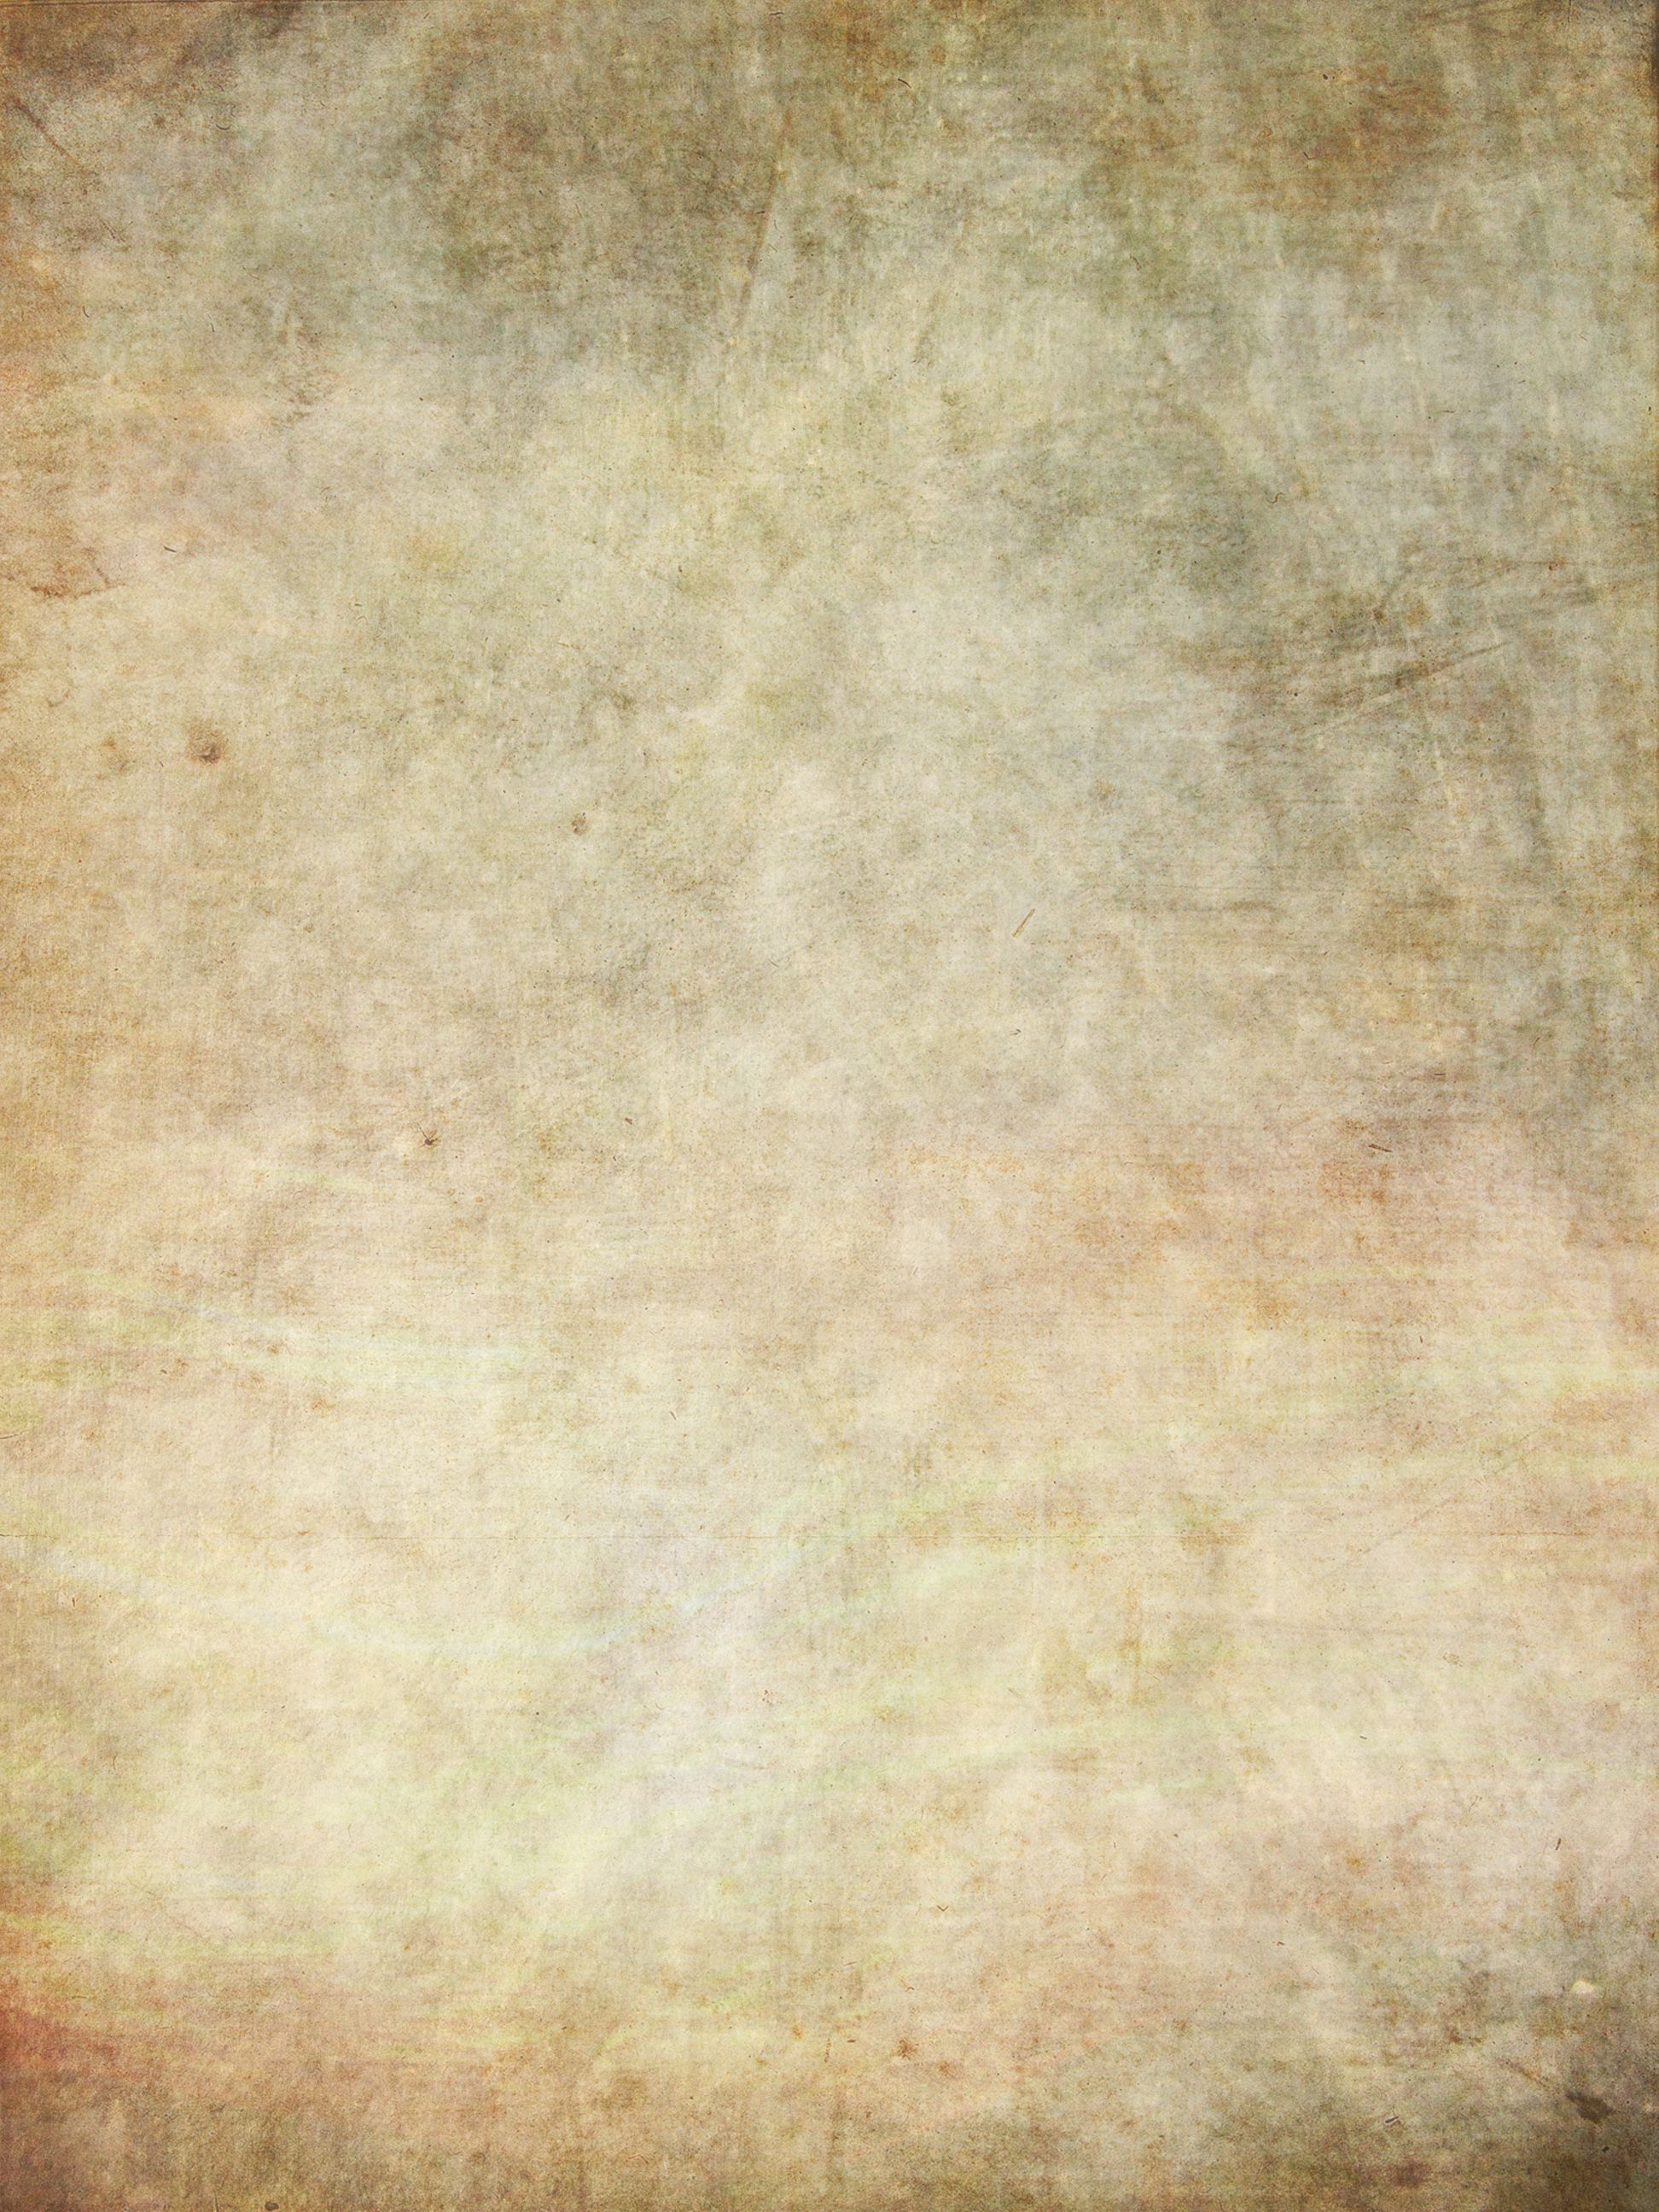 raw paper texture | subtle light texture with layered elements ...